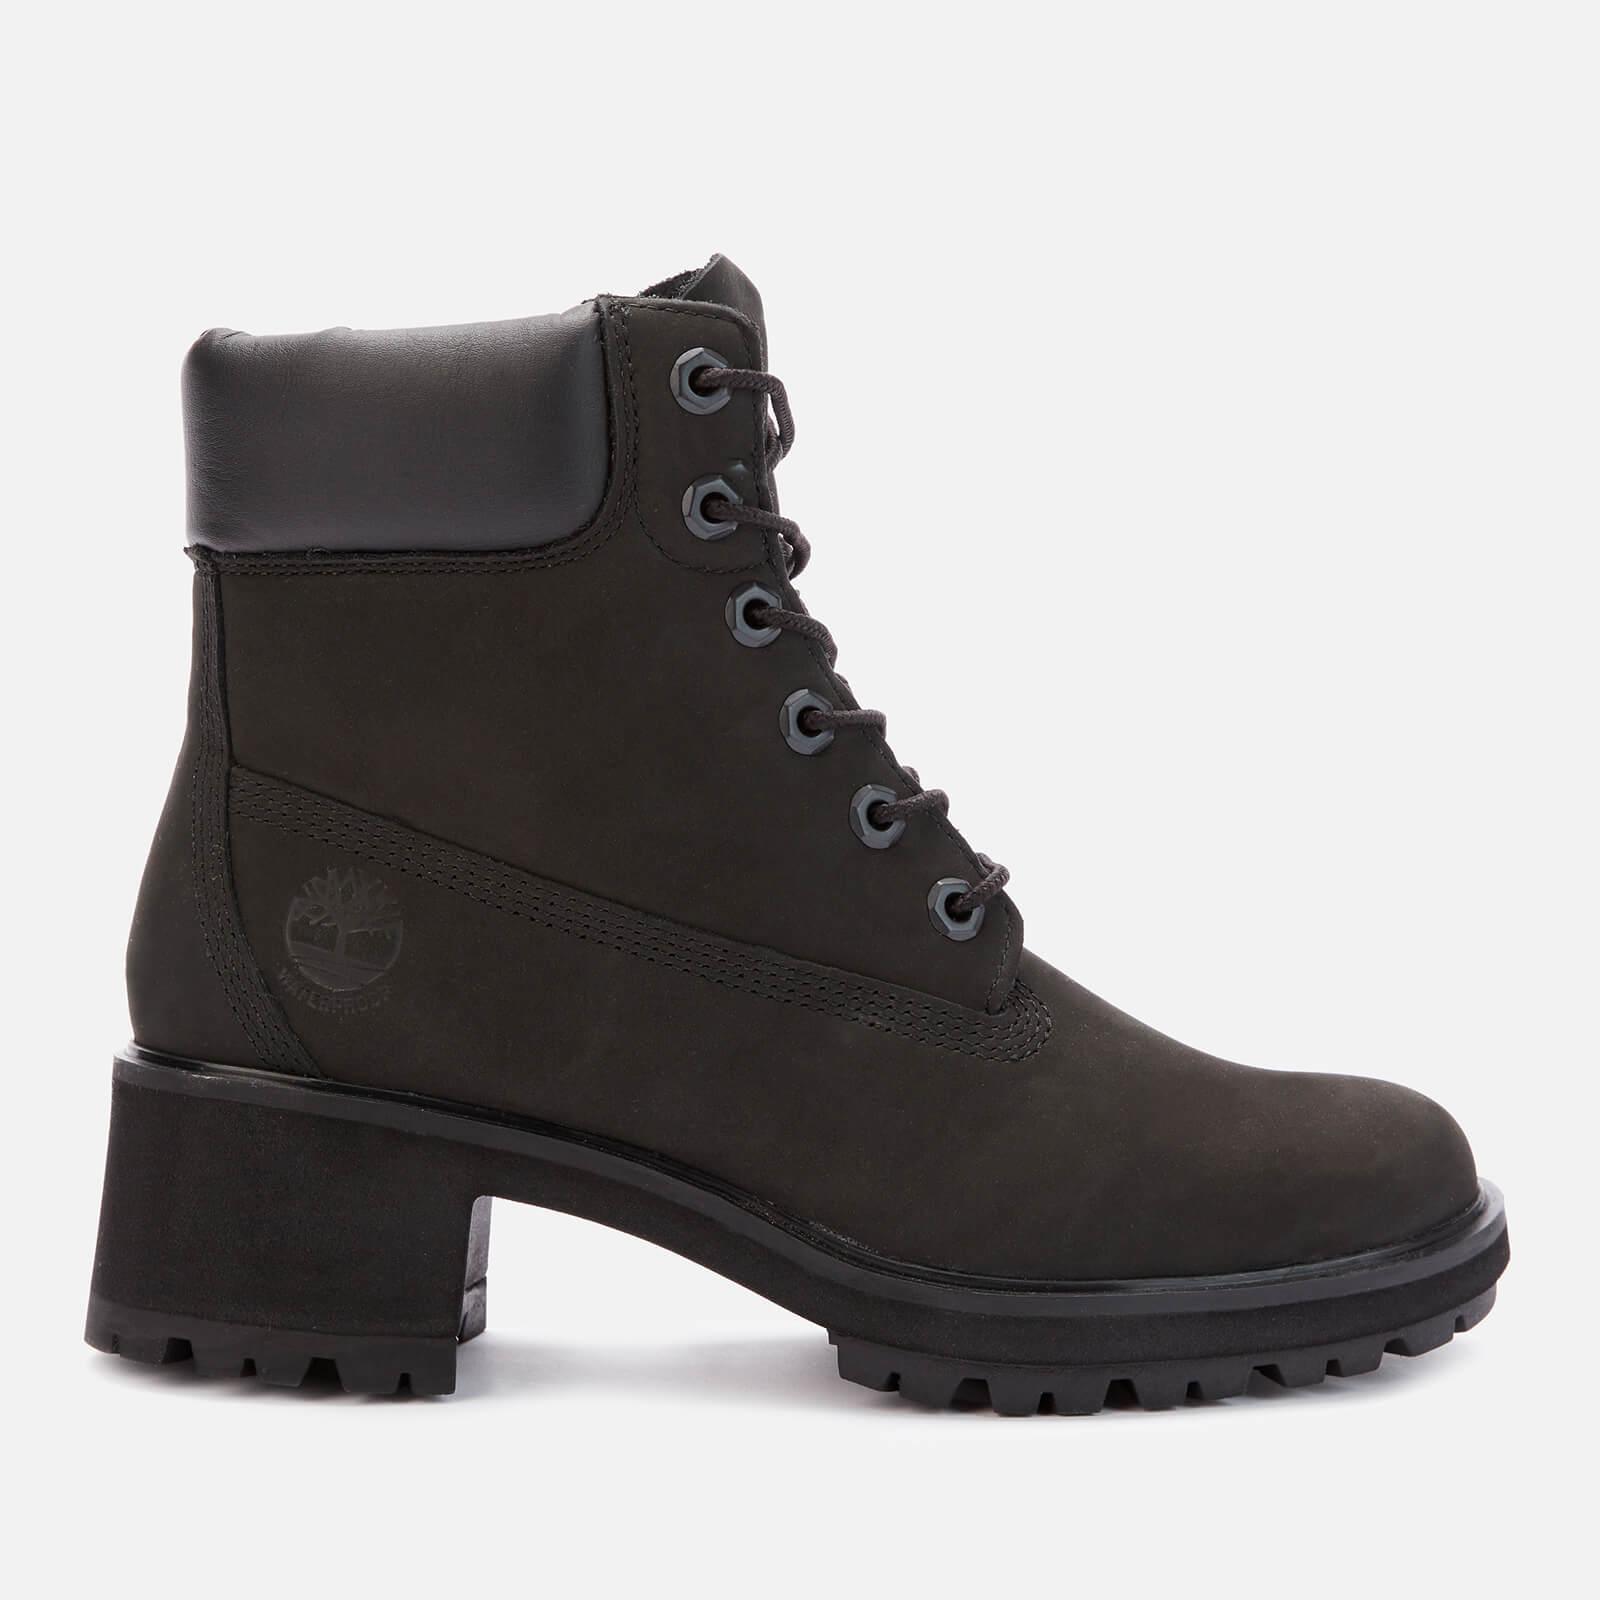 Timberland Rubber Kinsley 6 Inch Waterproof Heeled Boots in Black - Lyst